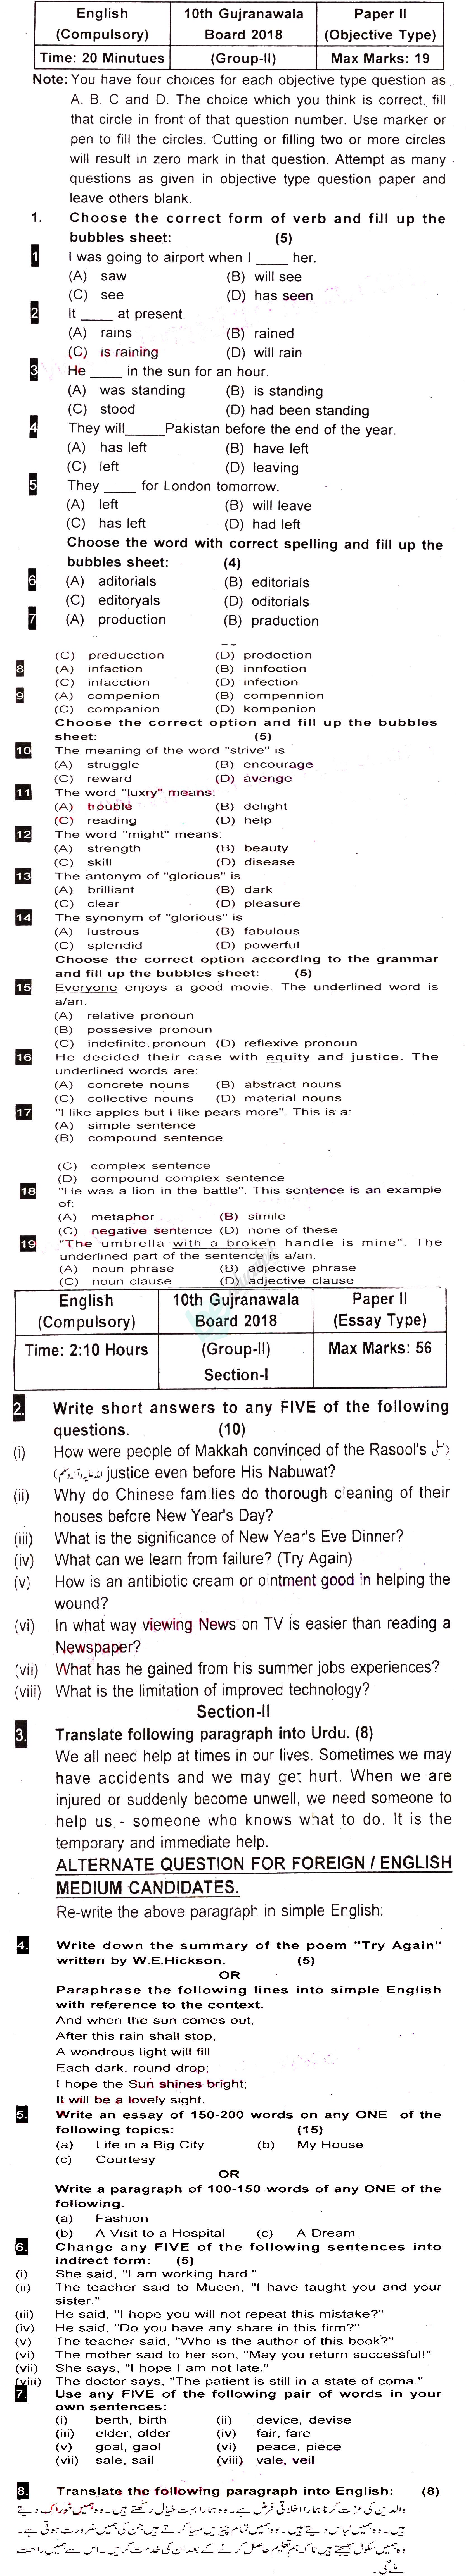 English 10th class Past Paper Group 2 BISE Gujranwala 2018